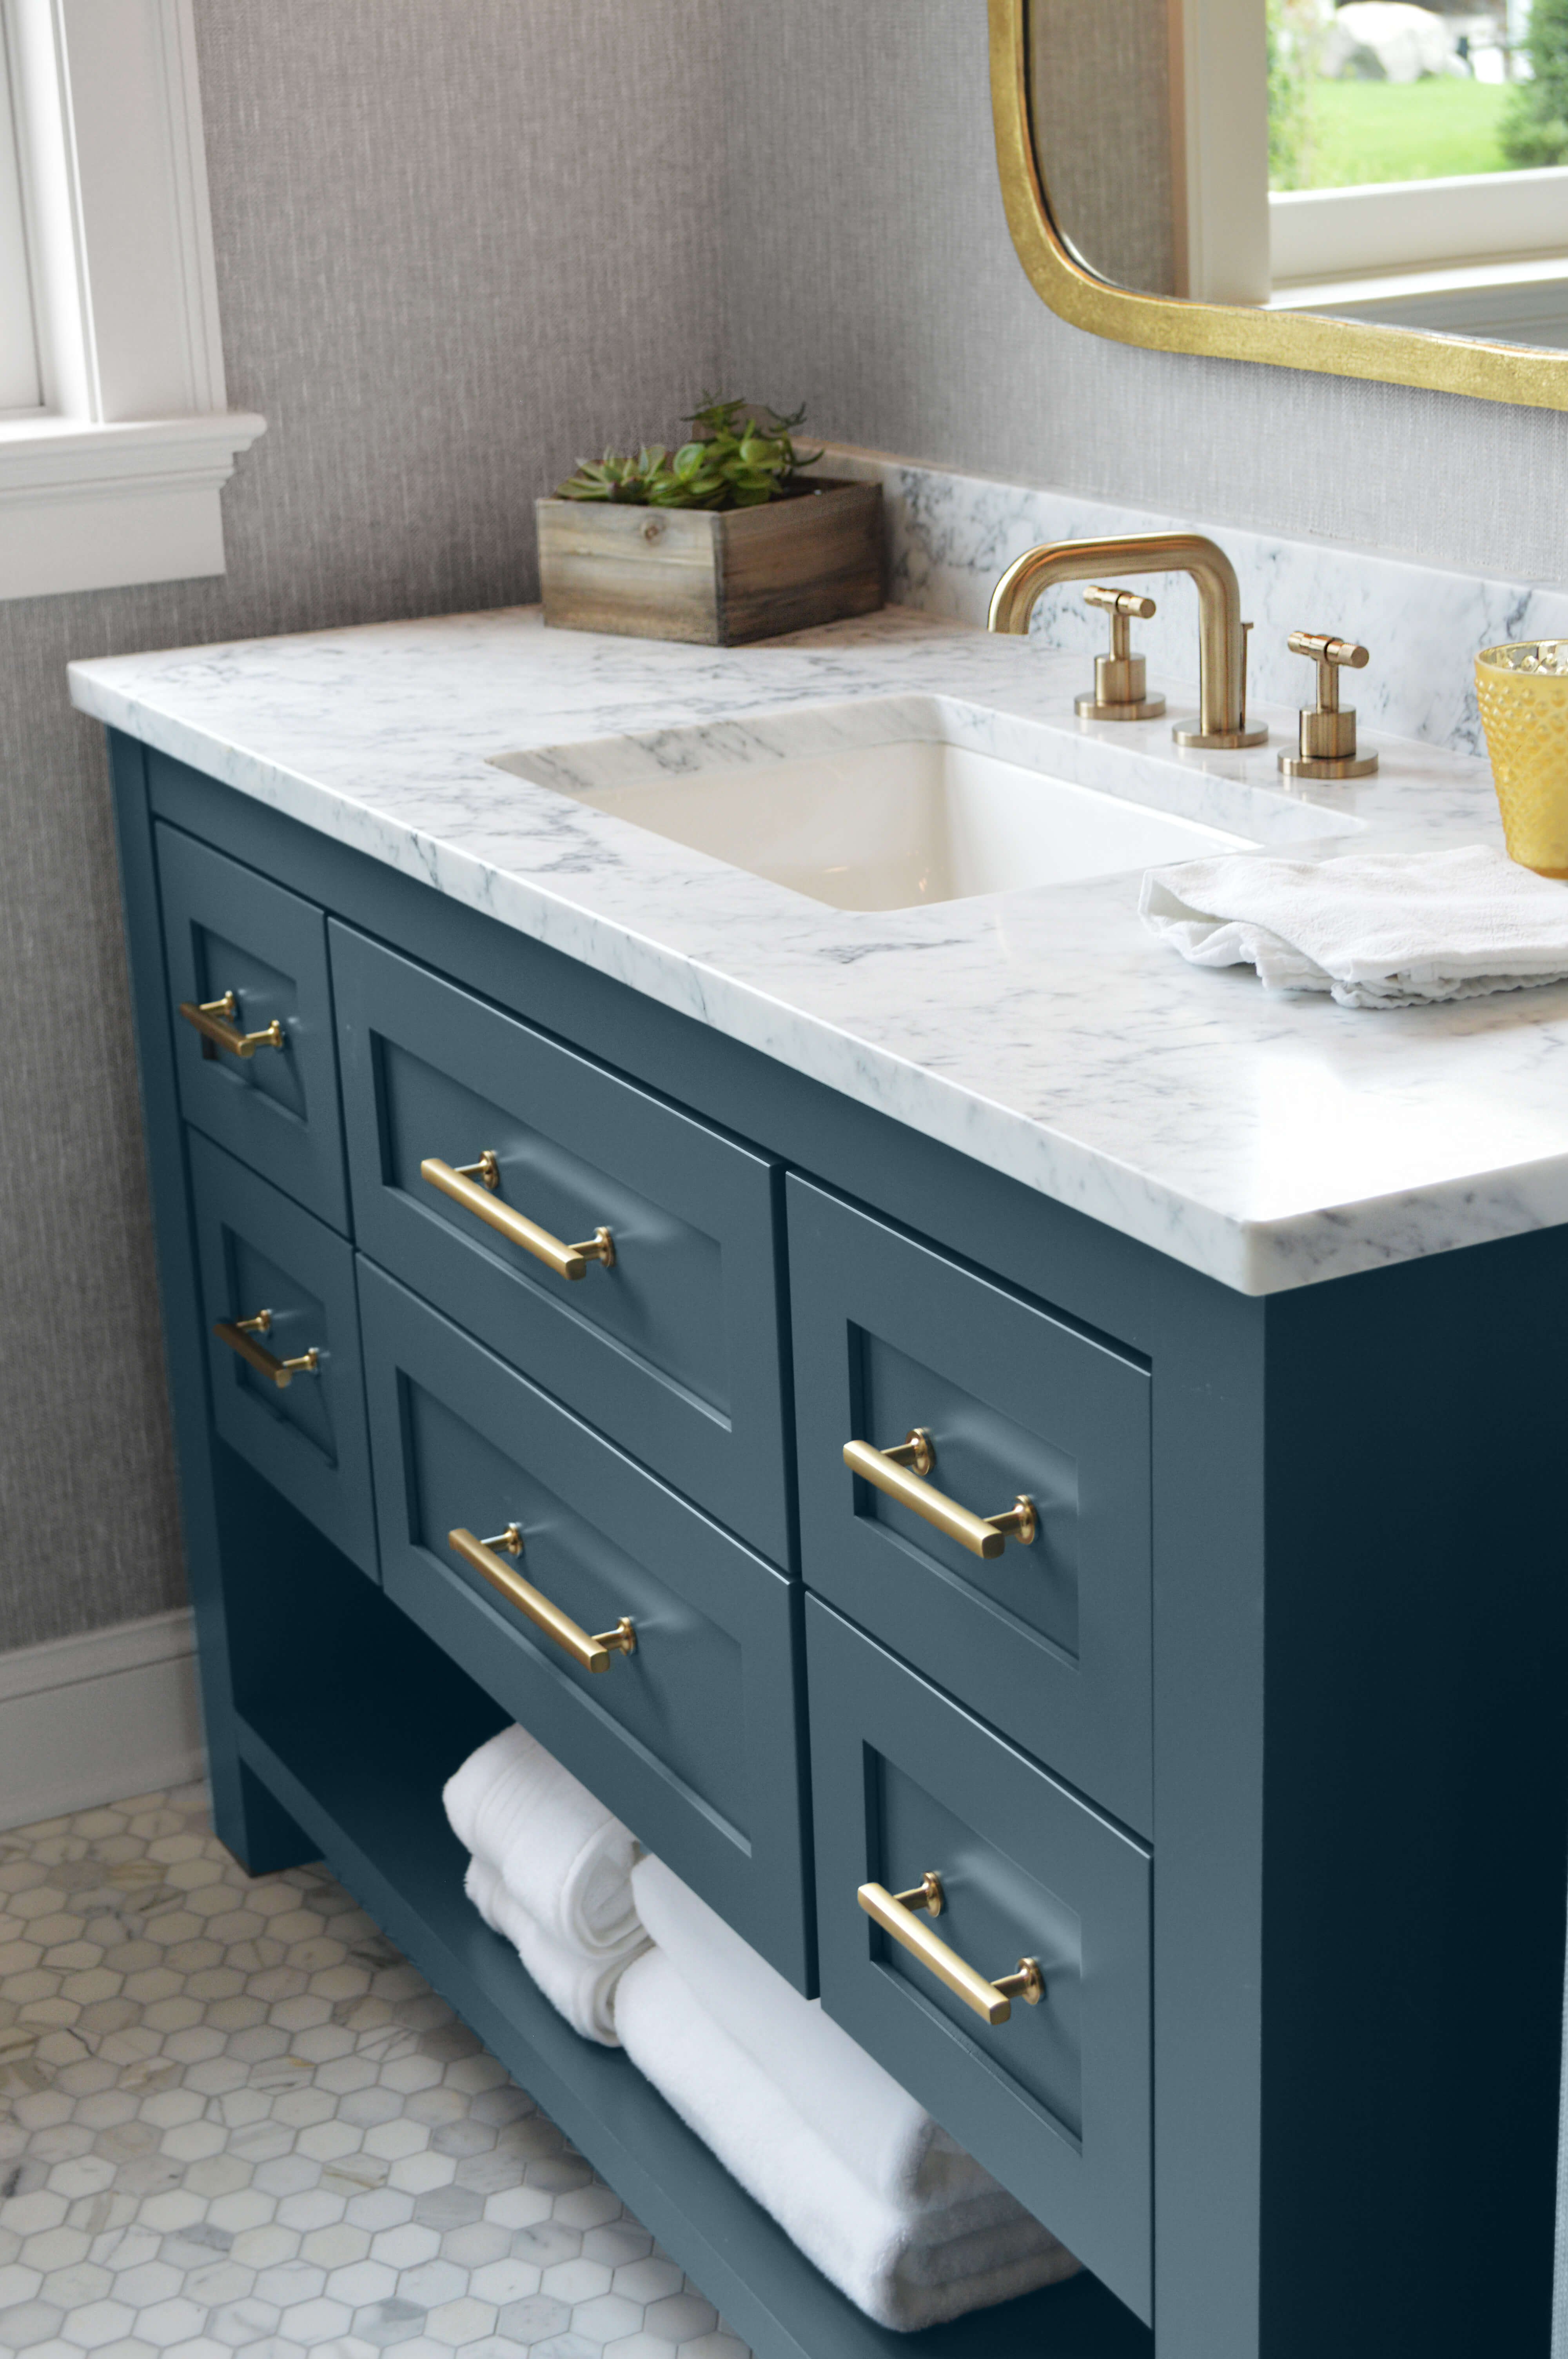 A dark, aqua blue painted bathroom vanity with a furniture style and brushed brass hardware and accents.